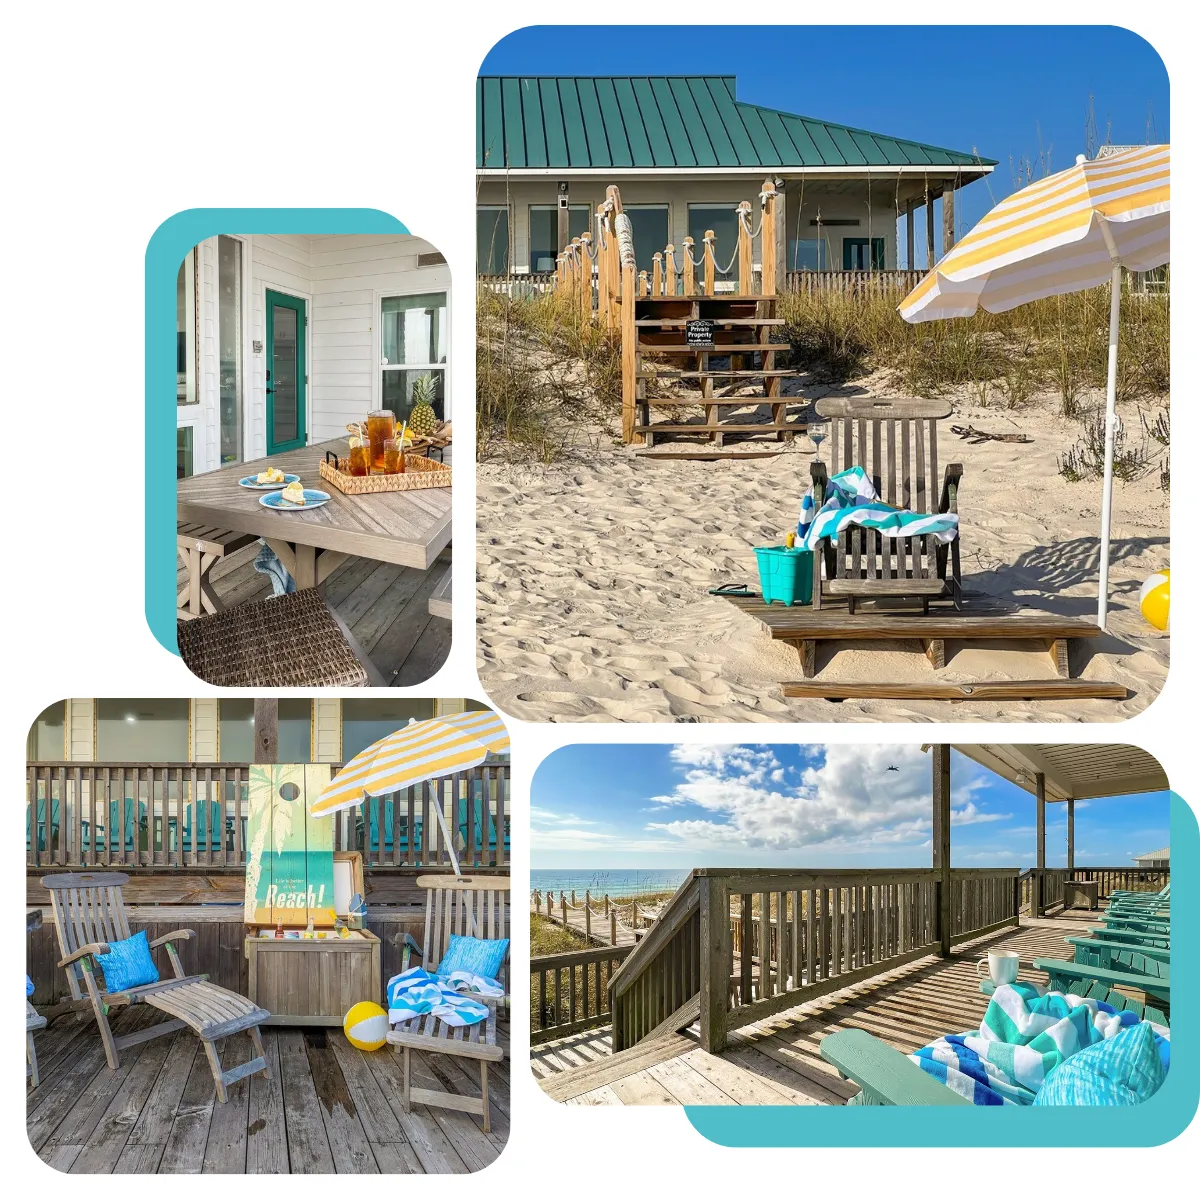 Stay at Surfside Paradise for ocean views, beach access, arcade games, beach essentials, fast WIFI, BBQ grill, and free parking.